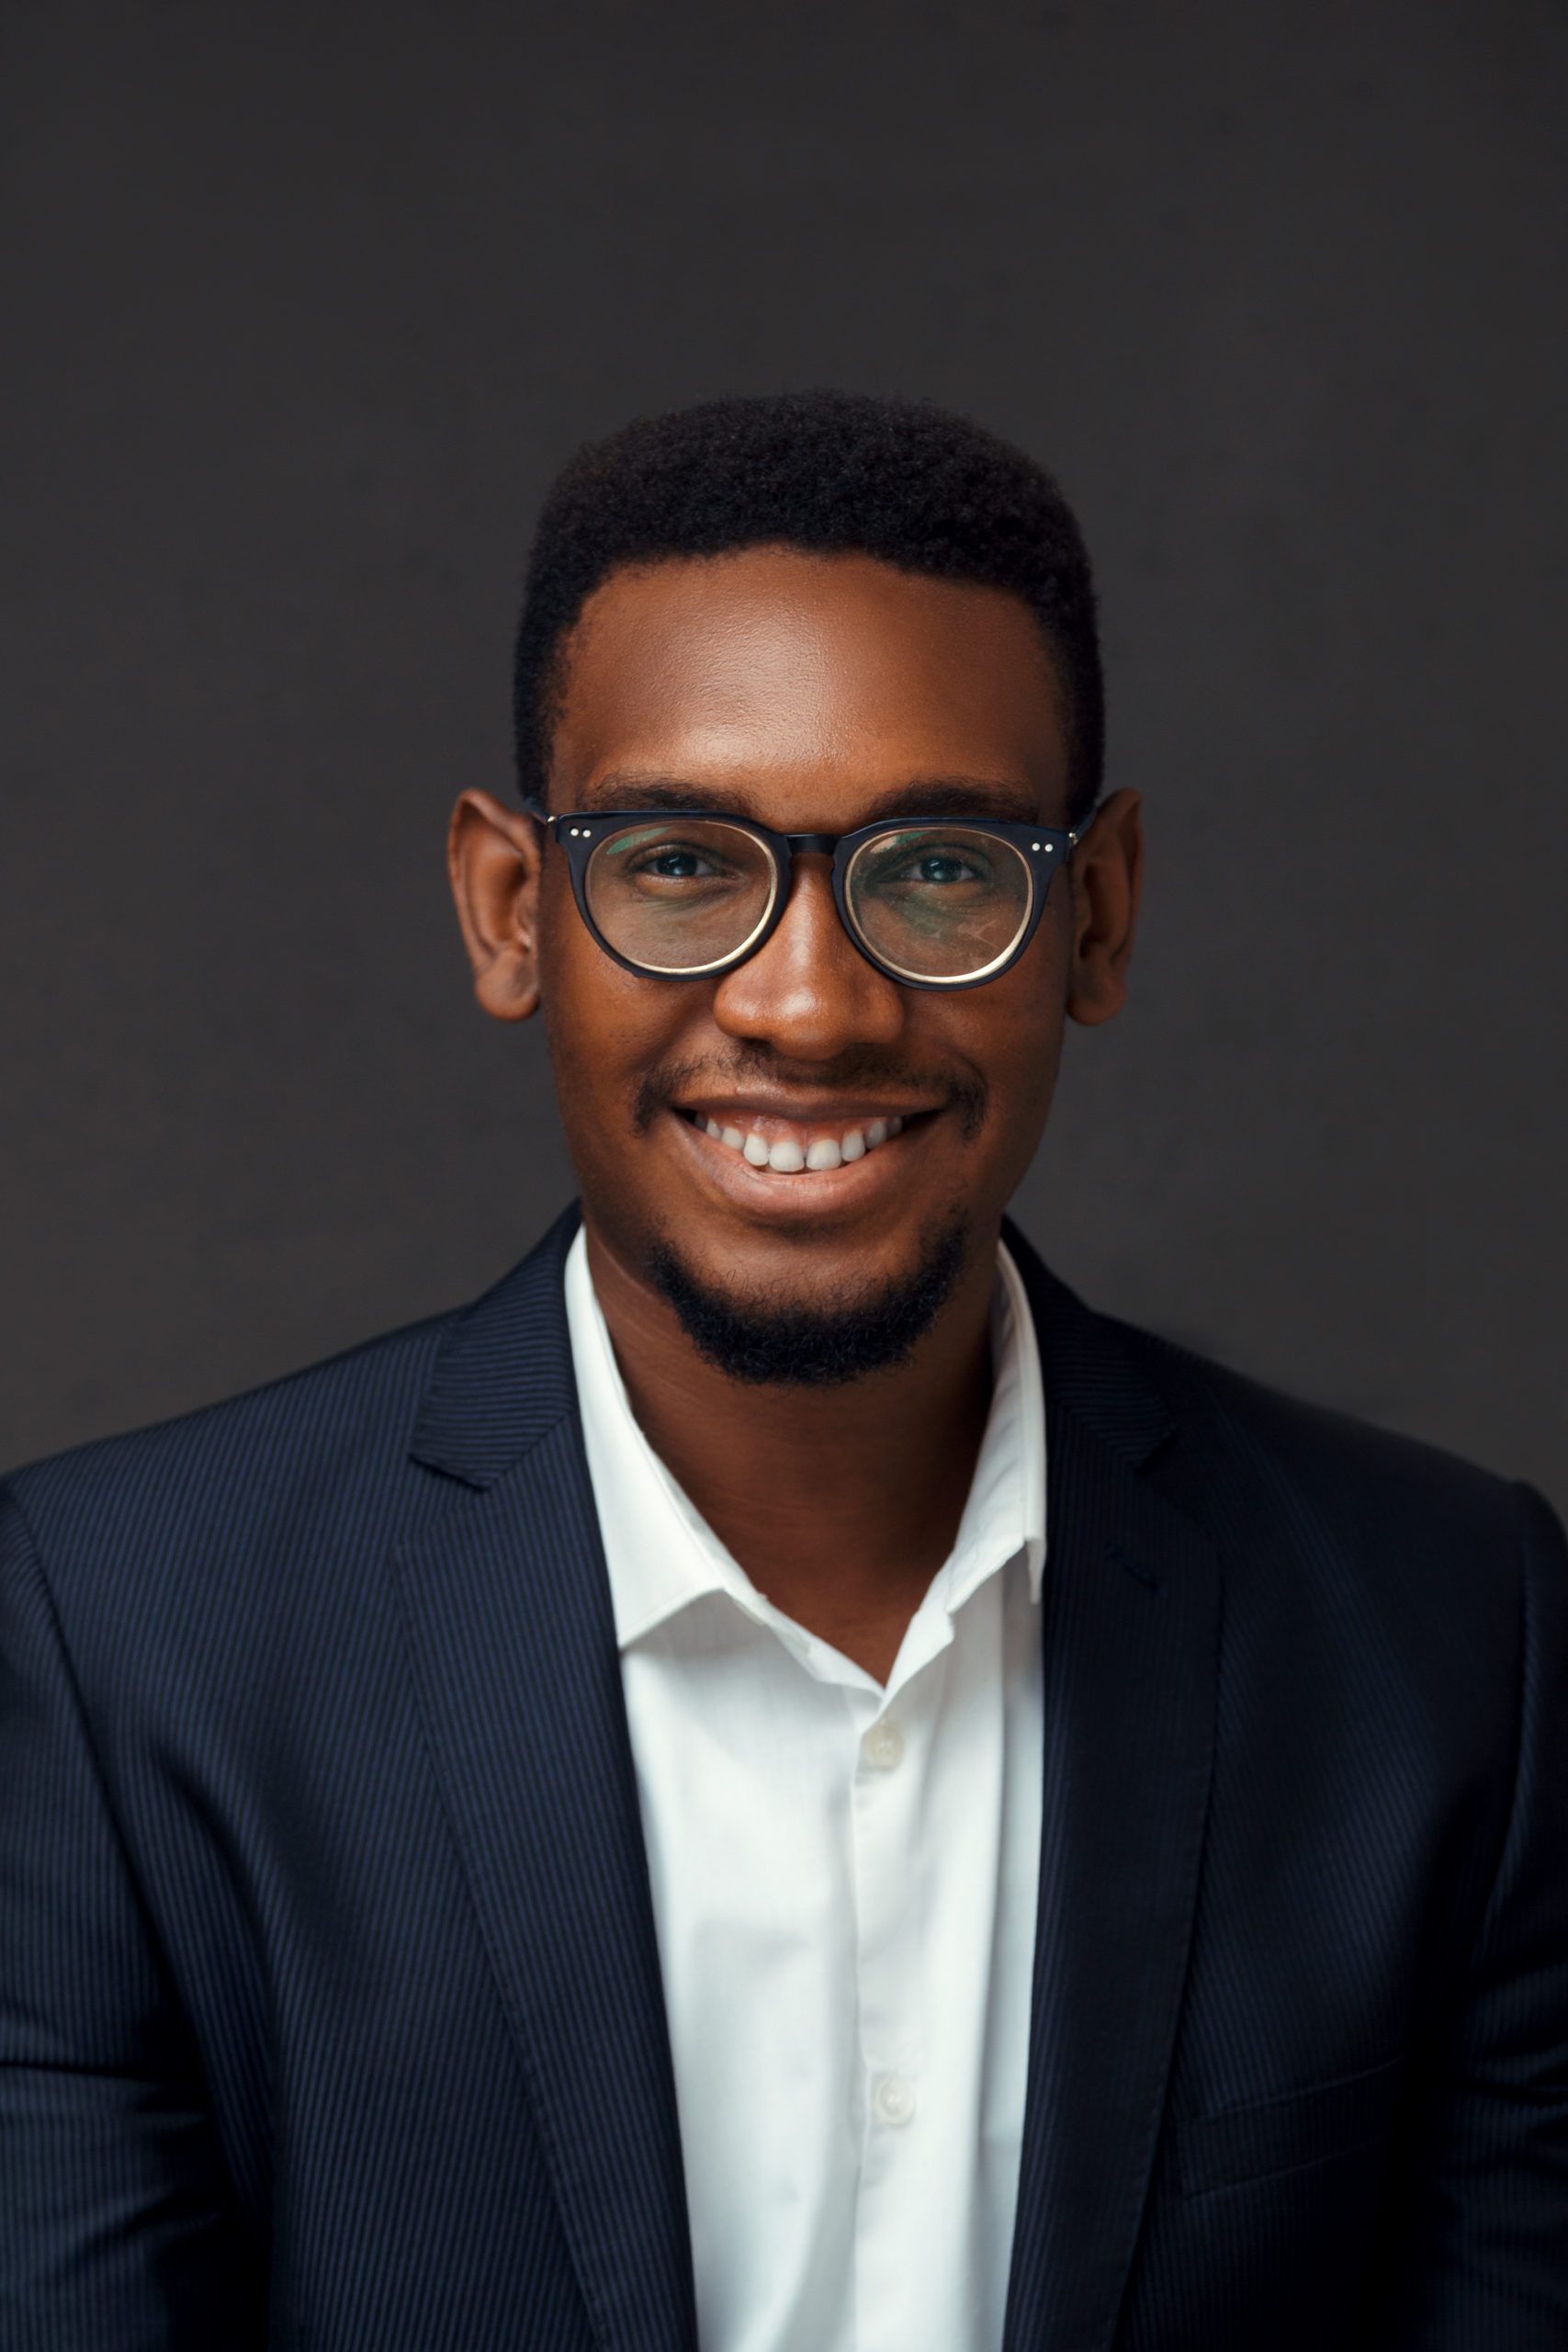 Hi, I'm Nonso - an all-round creative and marketing strategist who loves to bring great ideas to life.